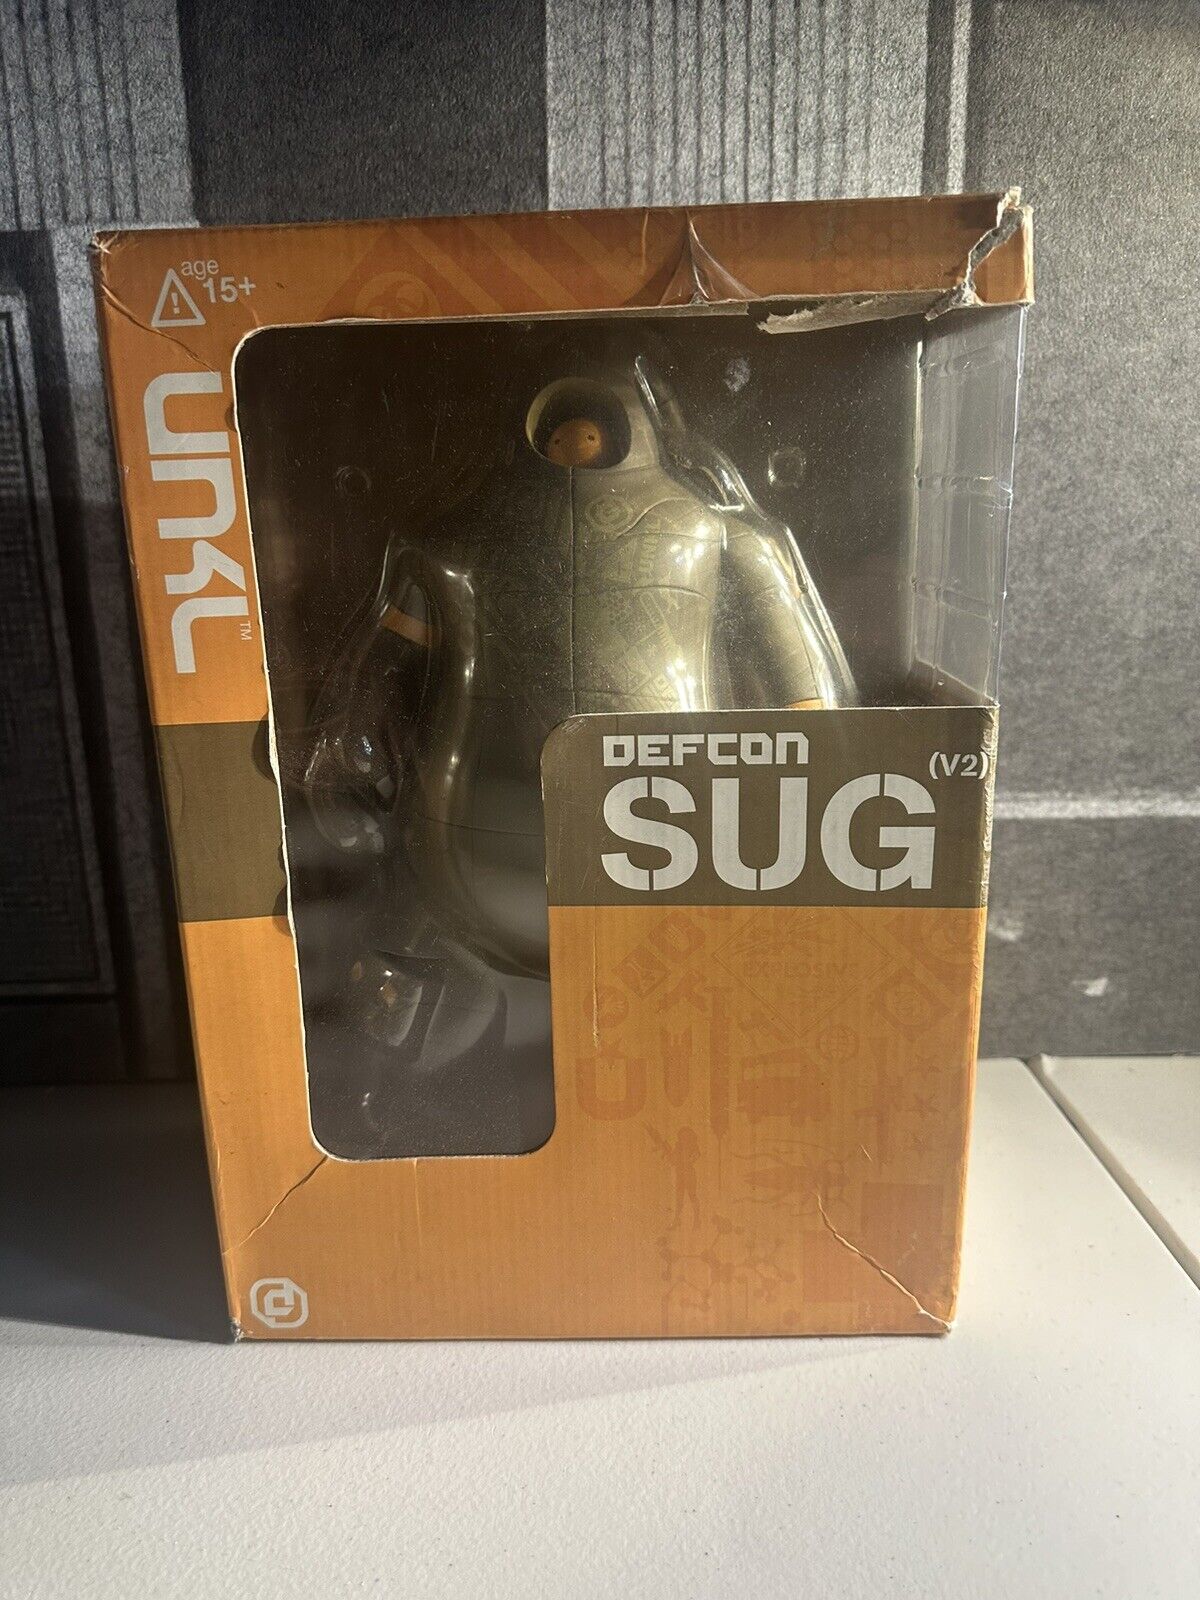 Defcon X UNKL SUG V2 12” Vinyl Figurine 2007 Super Rare Only 250 Made With Box🔥